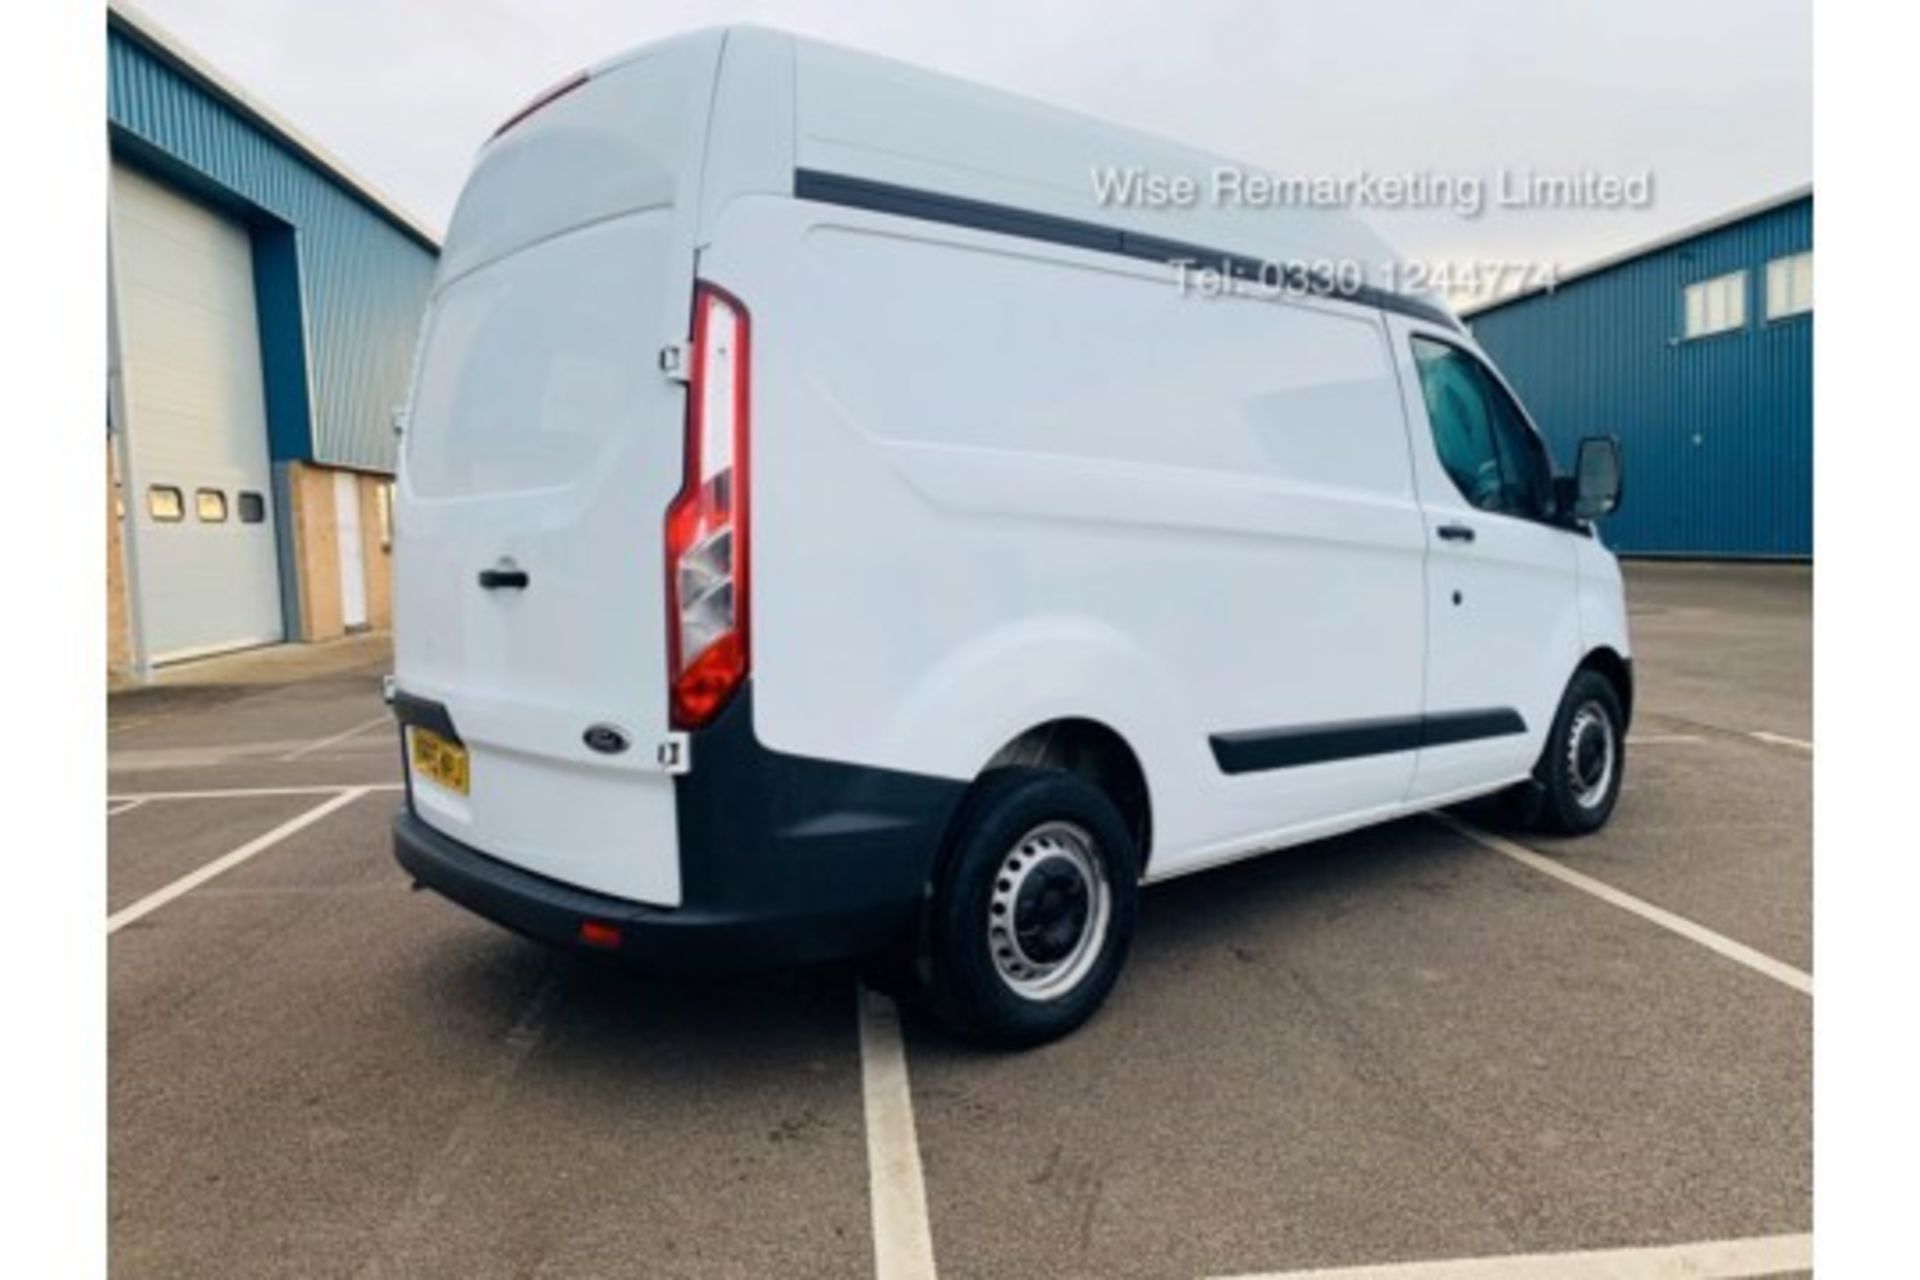 (RESERVE MET)Ford Transit Custom 2.2 TDCI 290 **HIGH ROOF** - 2016 model - AIR CON- 1 OWNER- FSH- - Image 4 of 18